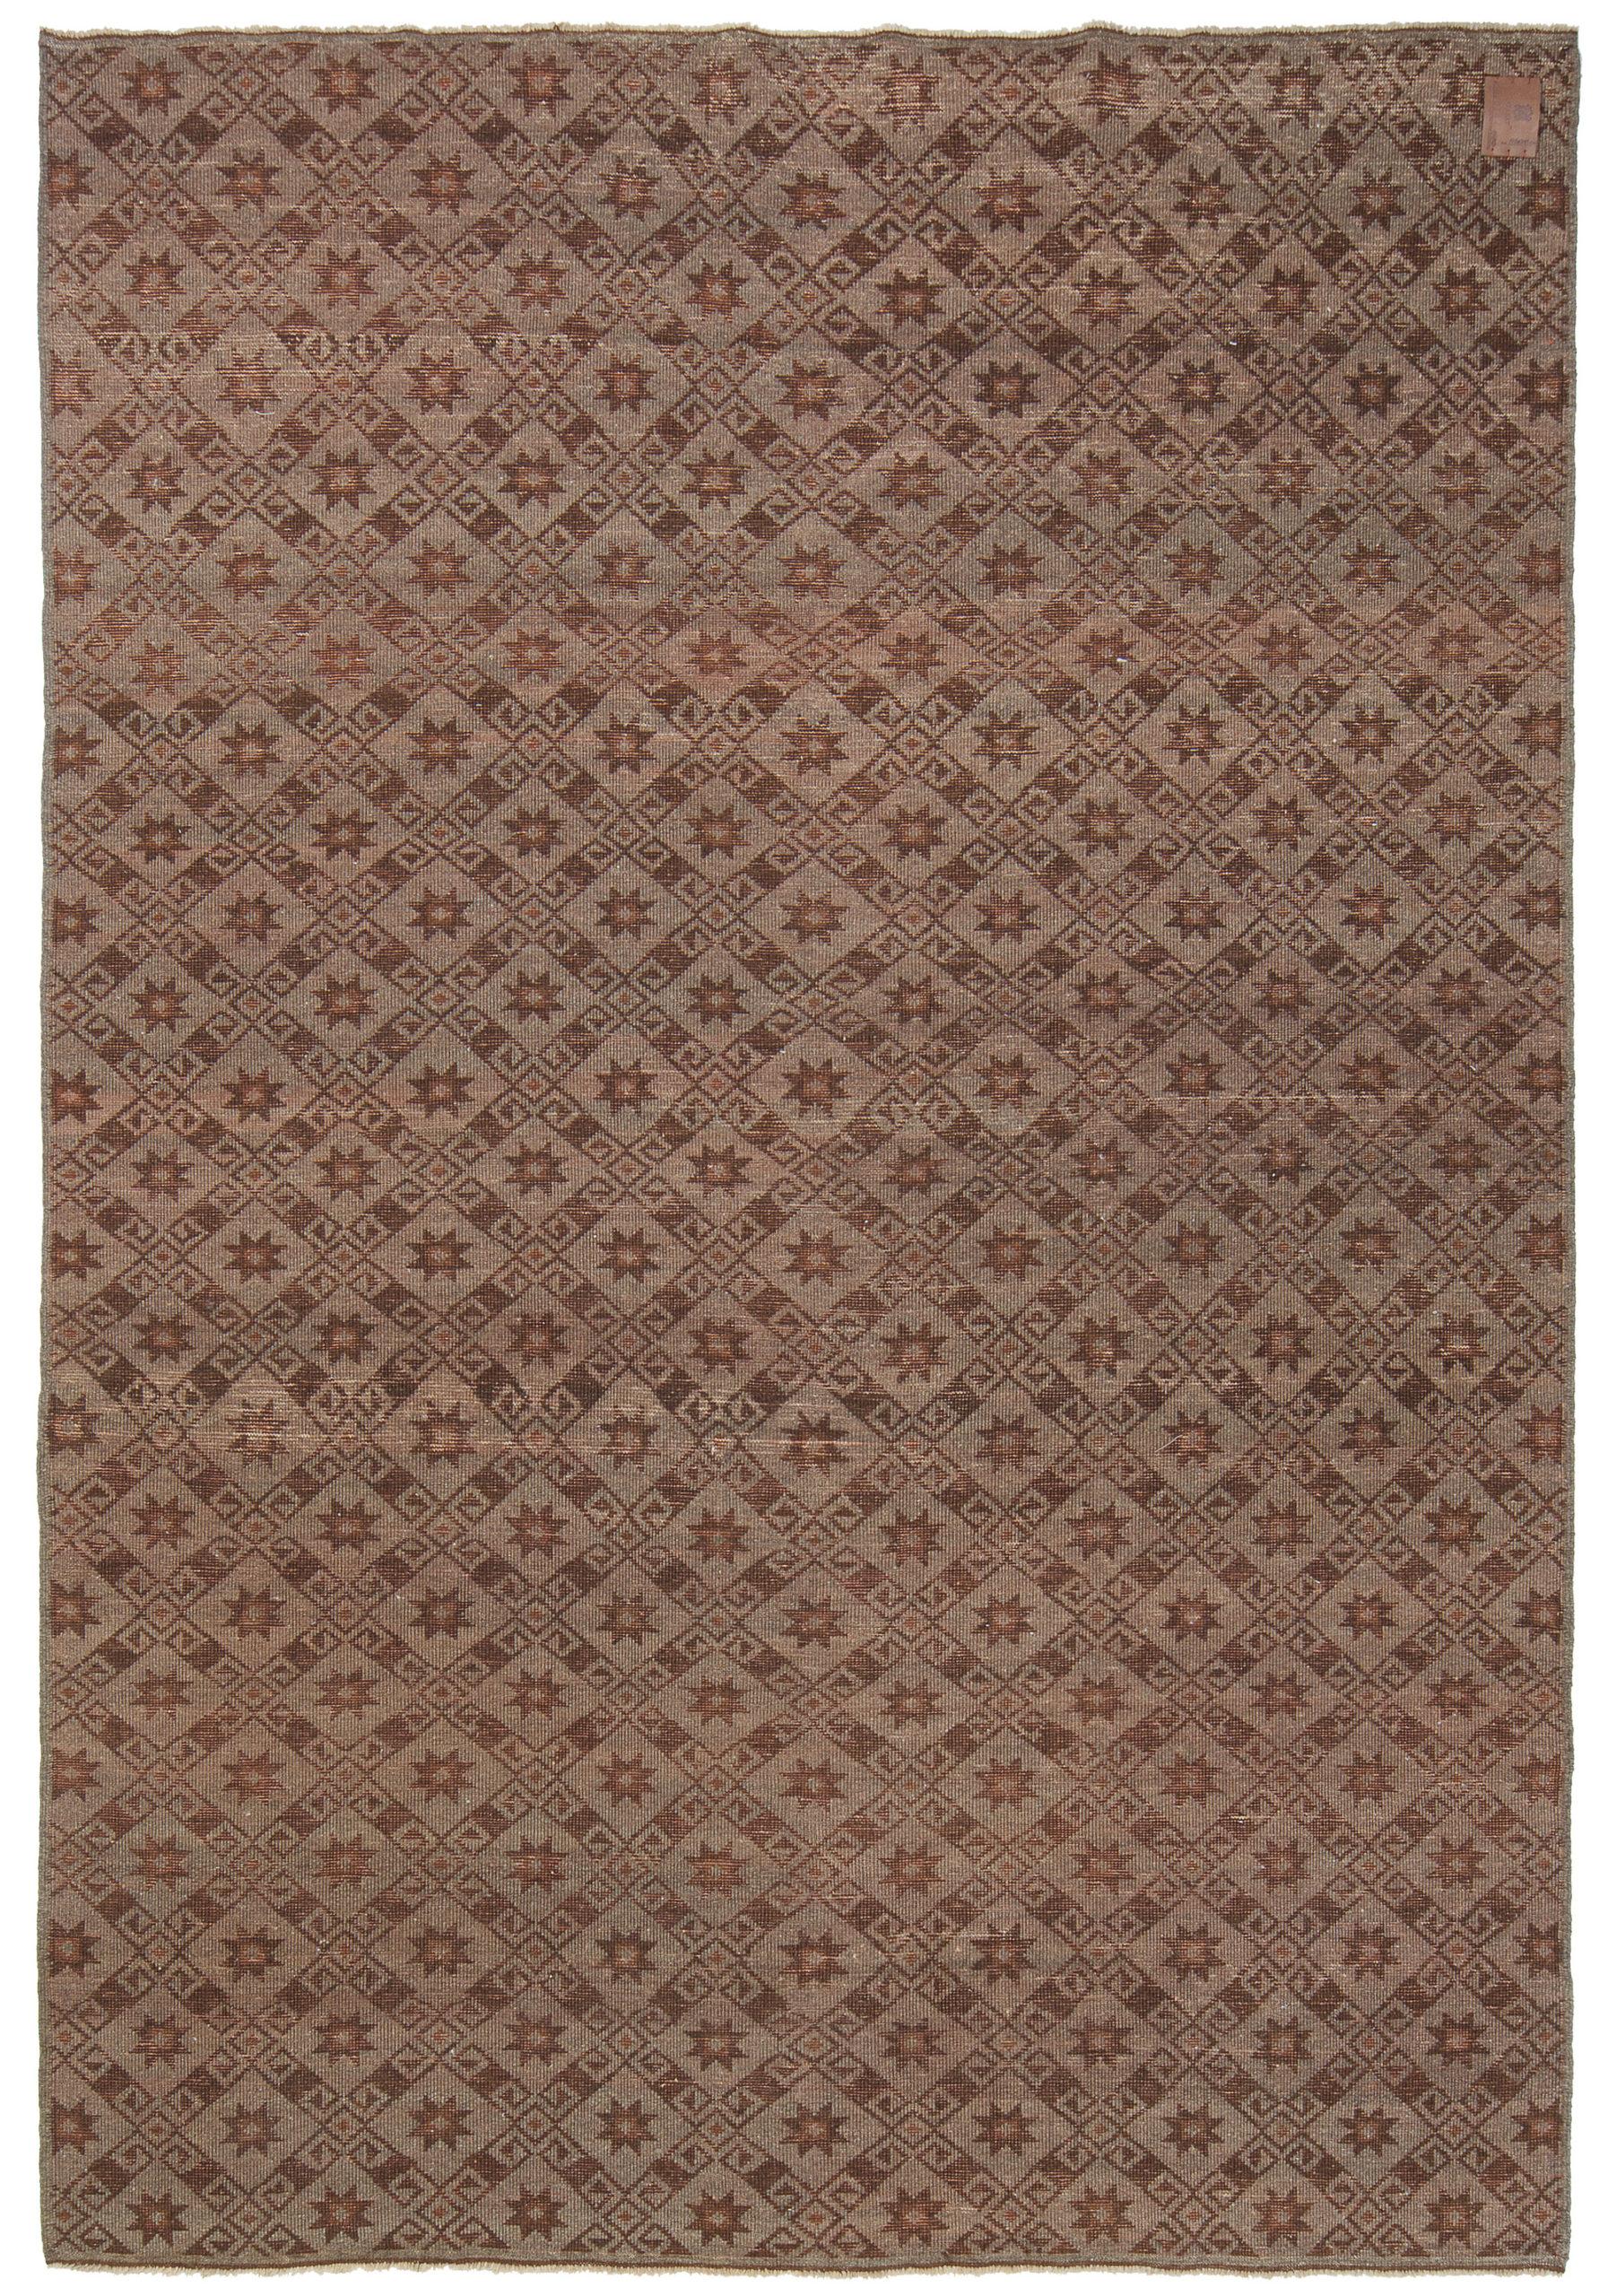 The source of the carpet comes from the book Orient Stars Collection, Anatolian Tribal Rugs 1050-1750, Michael Franses, Hali Publications Ltd, 2021 fig.24. This 13th-century carpet is from probably the Konya region, central Anatolia, circa 1200-1300